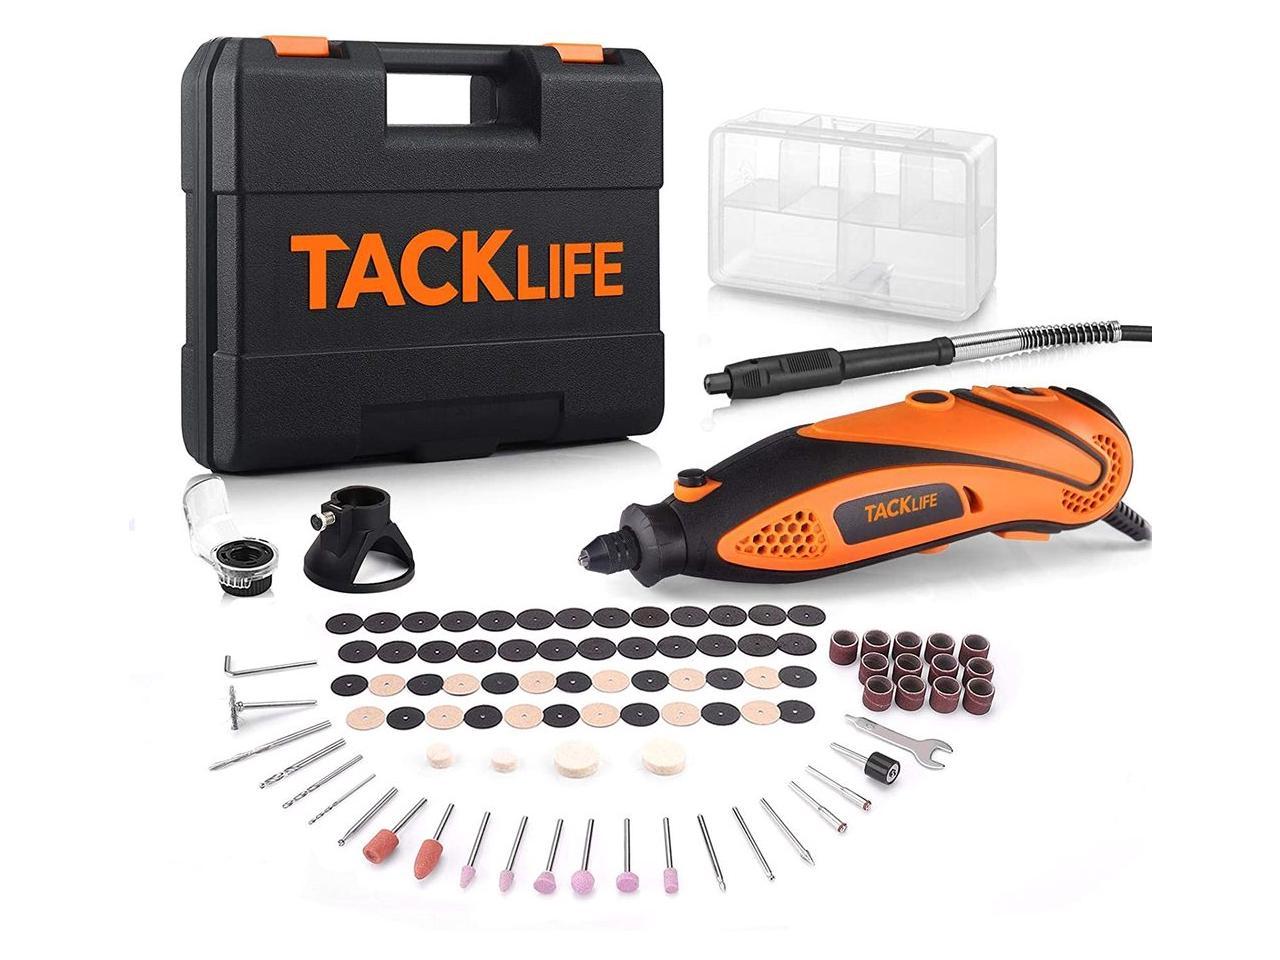 Carrying Case Rotary Tool Kit 1.8 Amp 63 Accessories Multi-Functional for Around-The-House and Crafting Projects 3 Attachments RTD36AC TACKLIFE Variable Speed with Upgraded Flex Shaft 